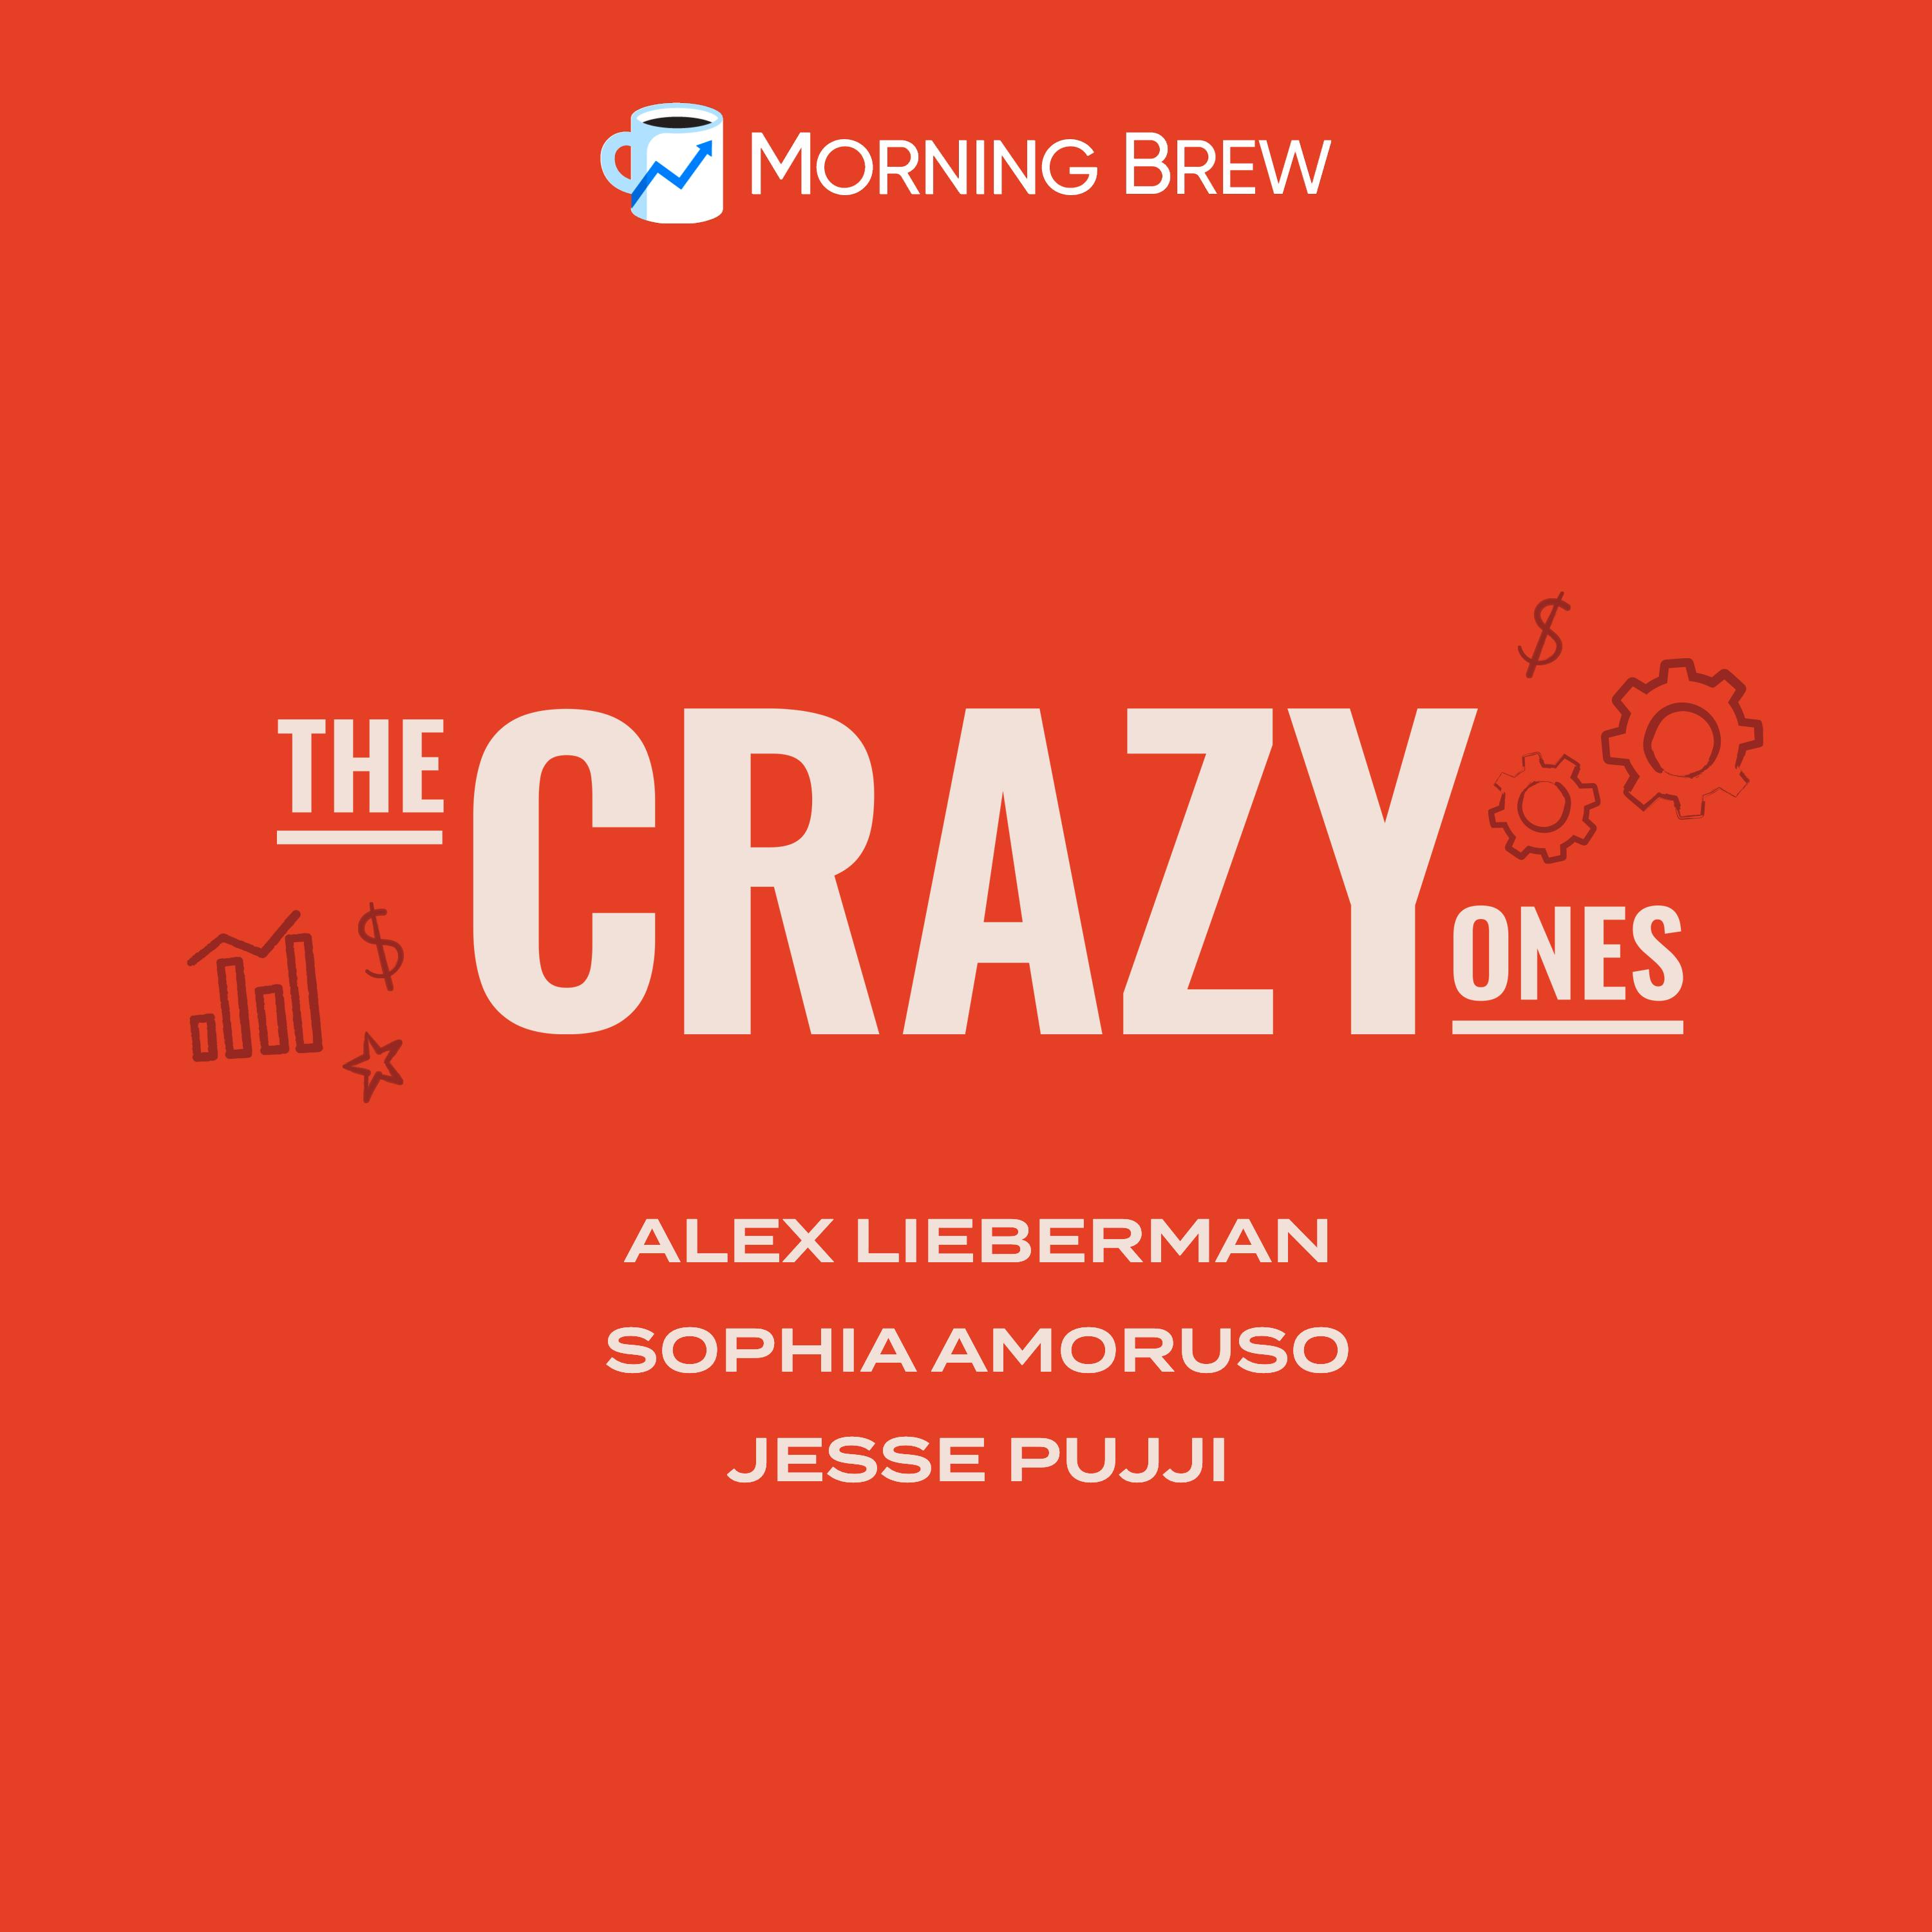 Co-founders Austin Rief and Alex Lieberman on Building Morning Brew